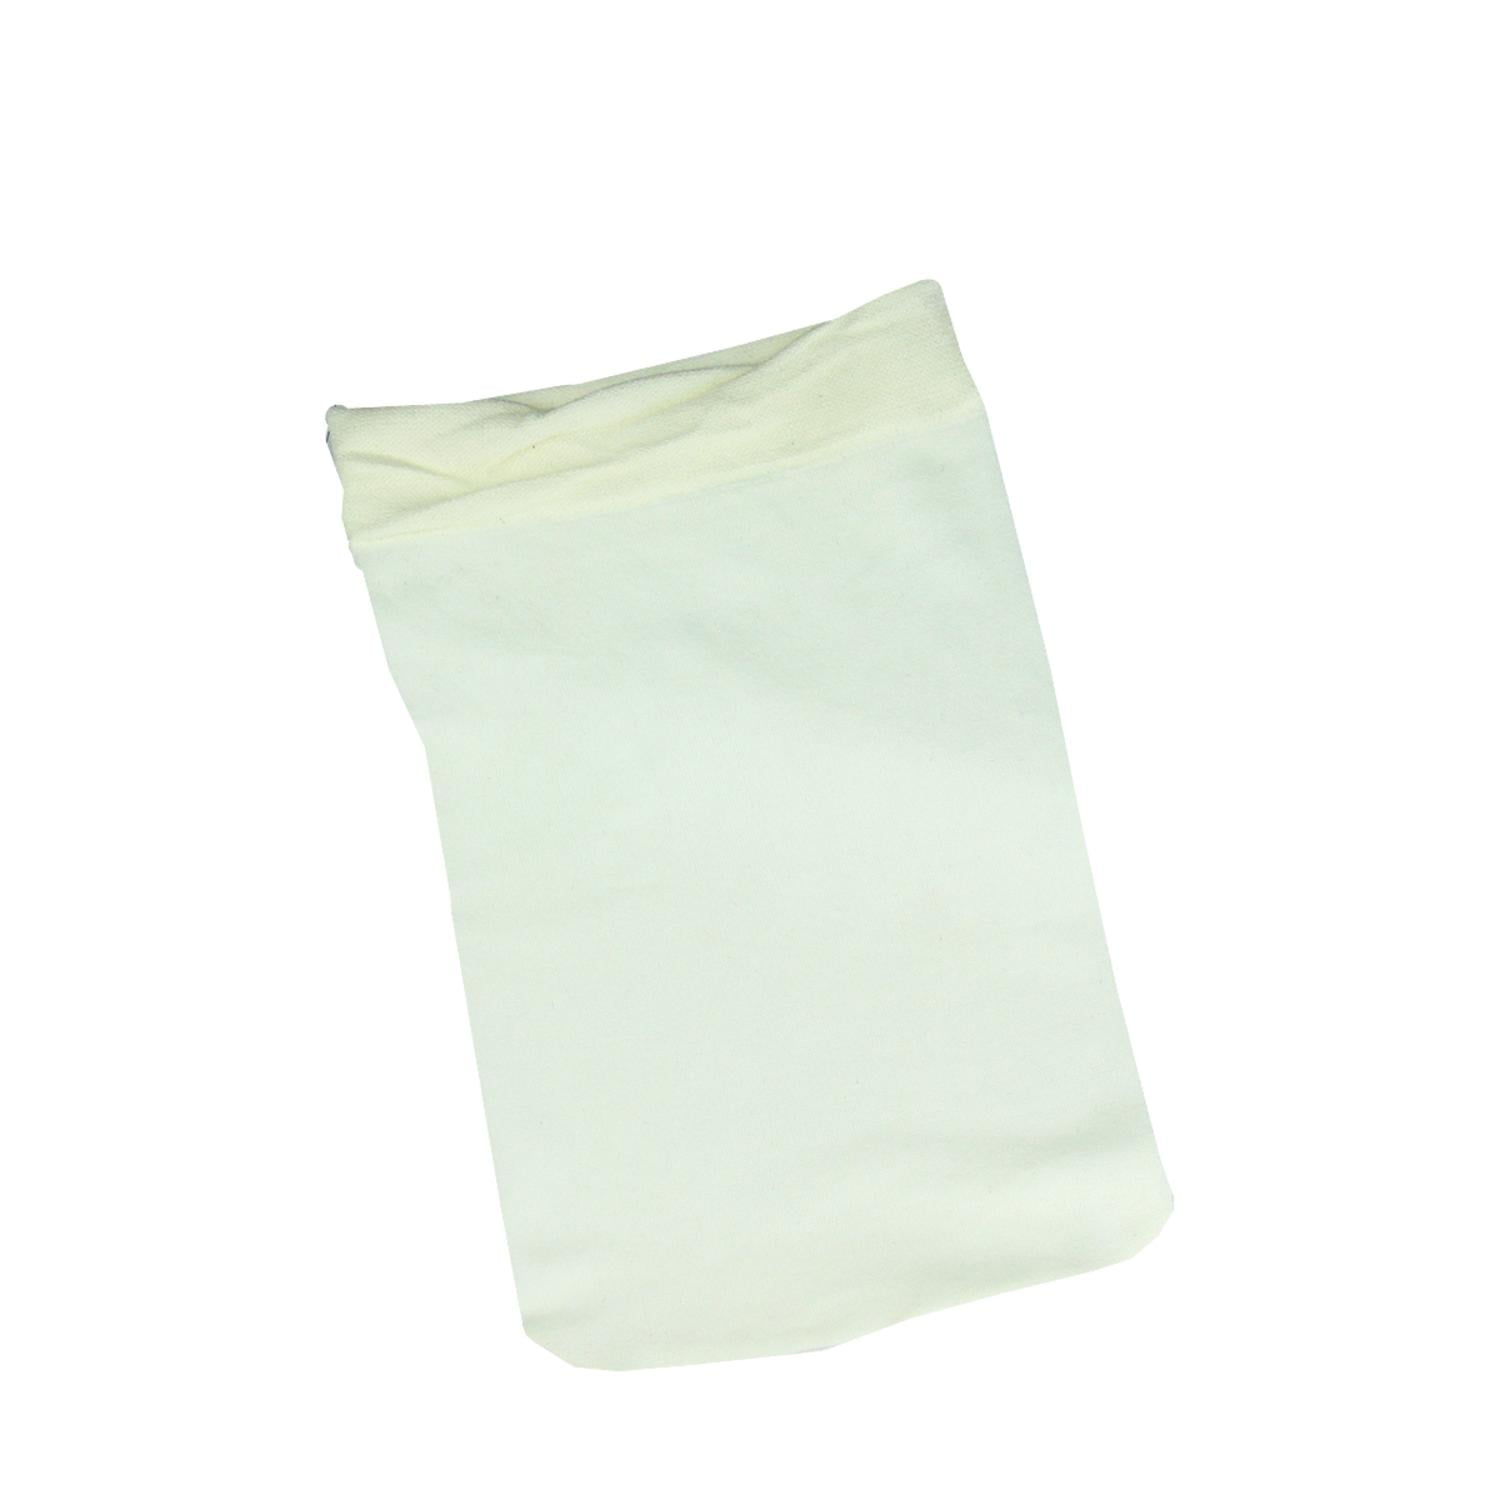 Swimming Pool Pool Skimmer Sock White 12 Pack Savers For Basket High Quality 